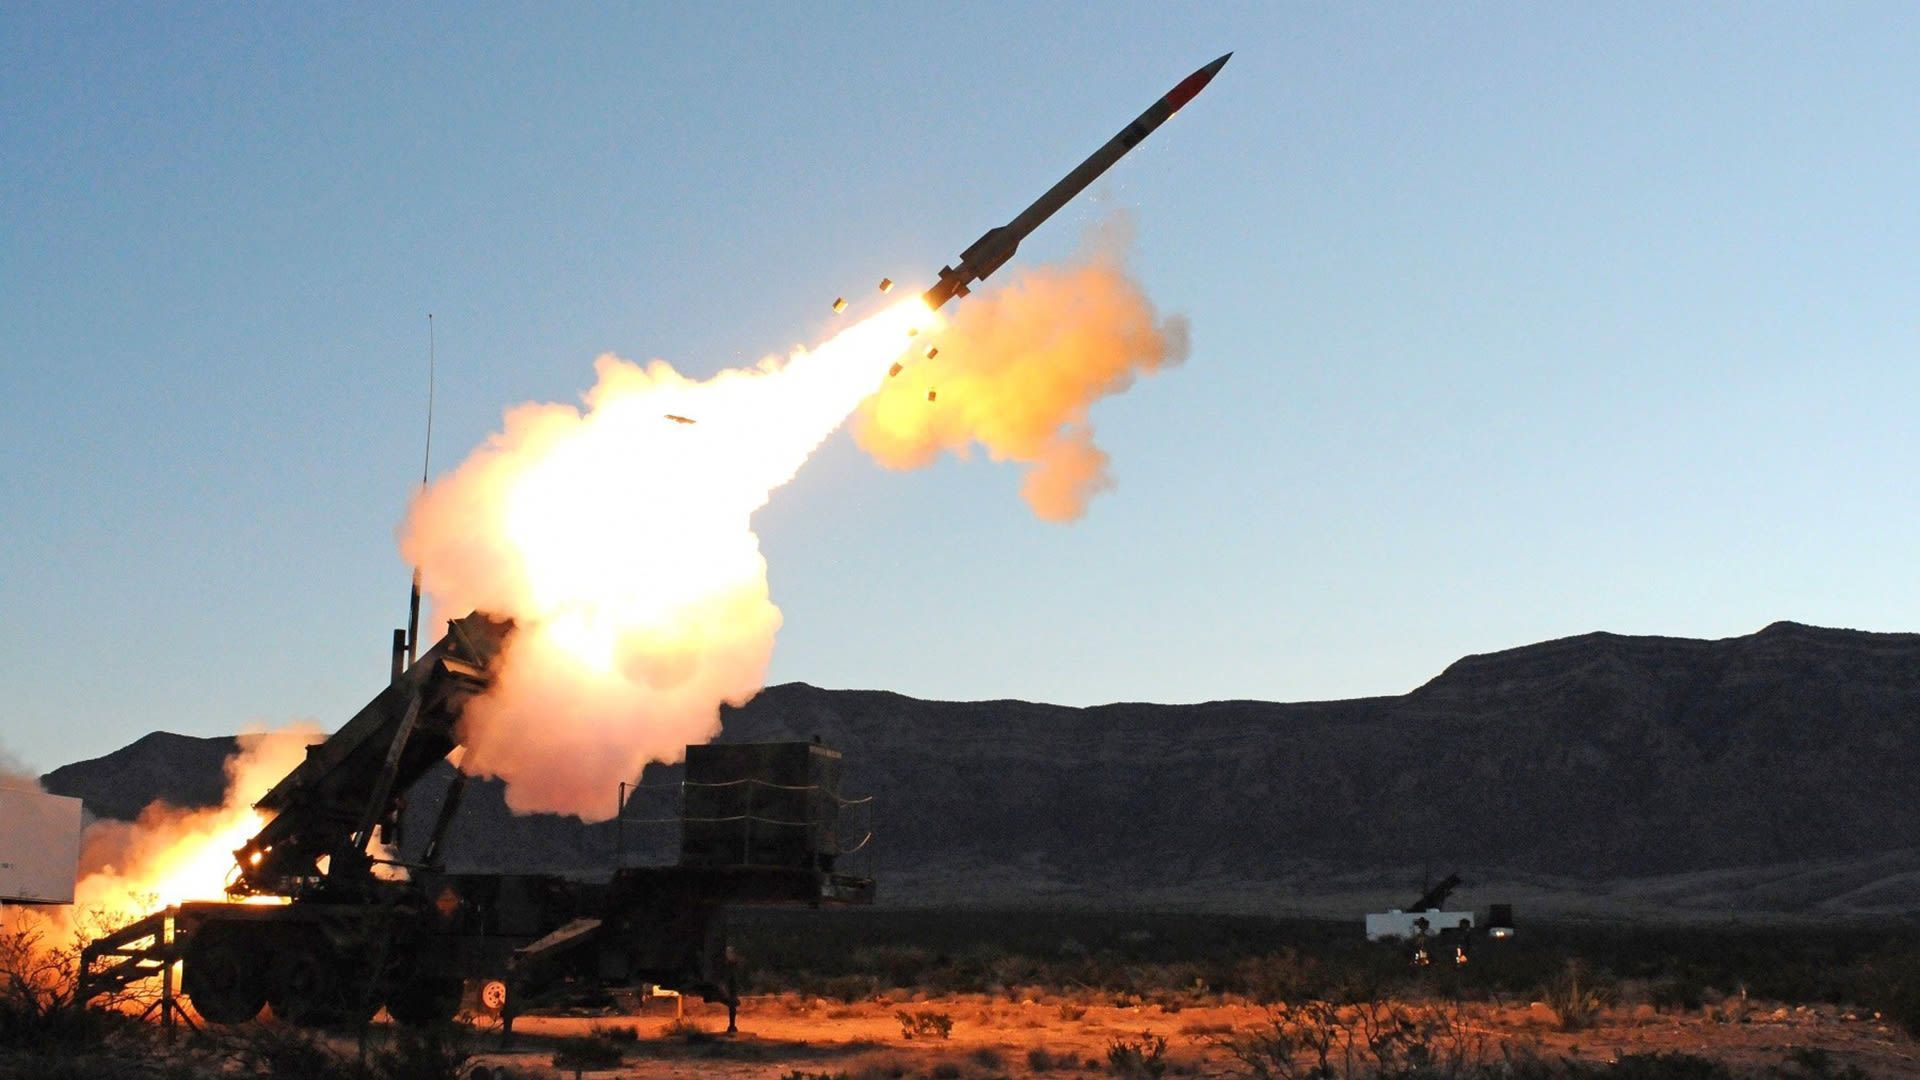 The U.S. Army is spending $4.5 billion to produce more Patriot missiles